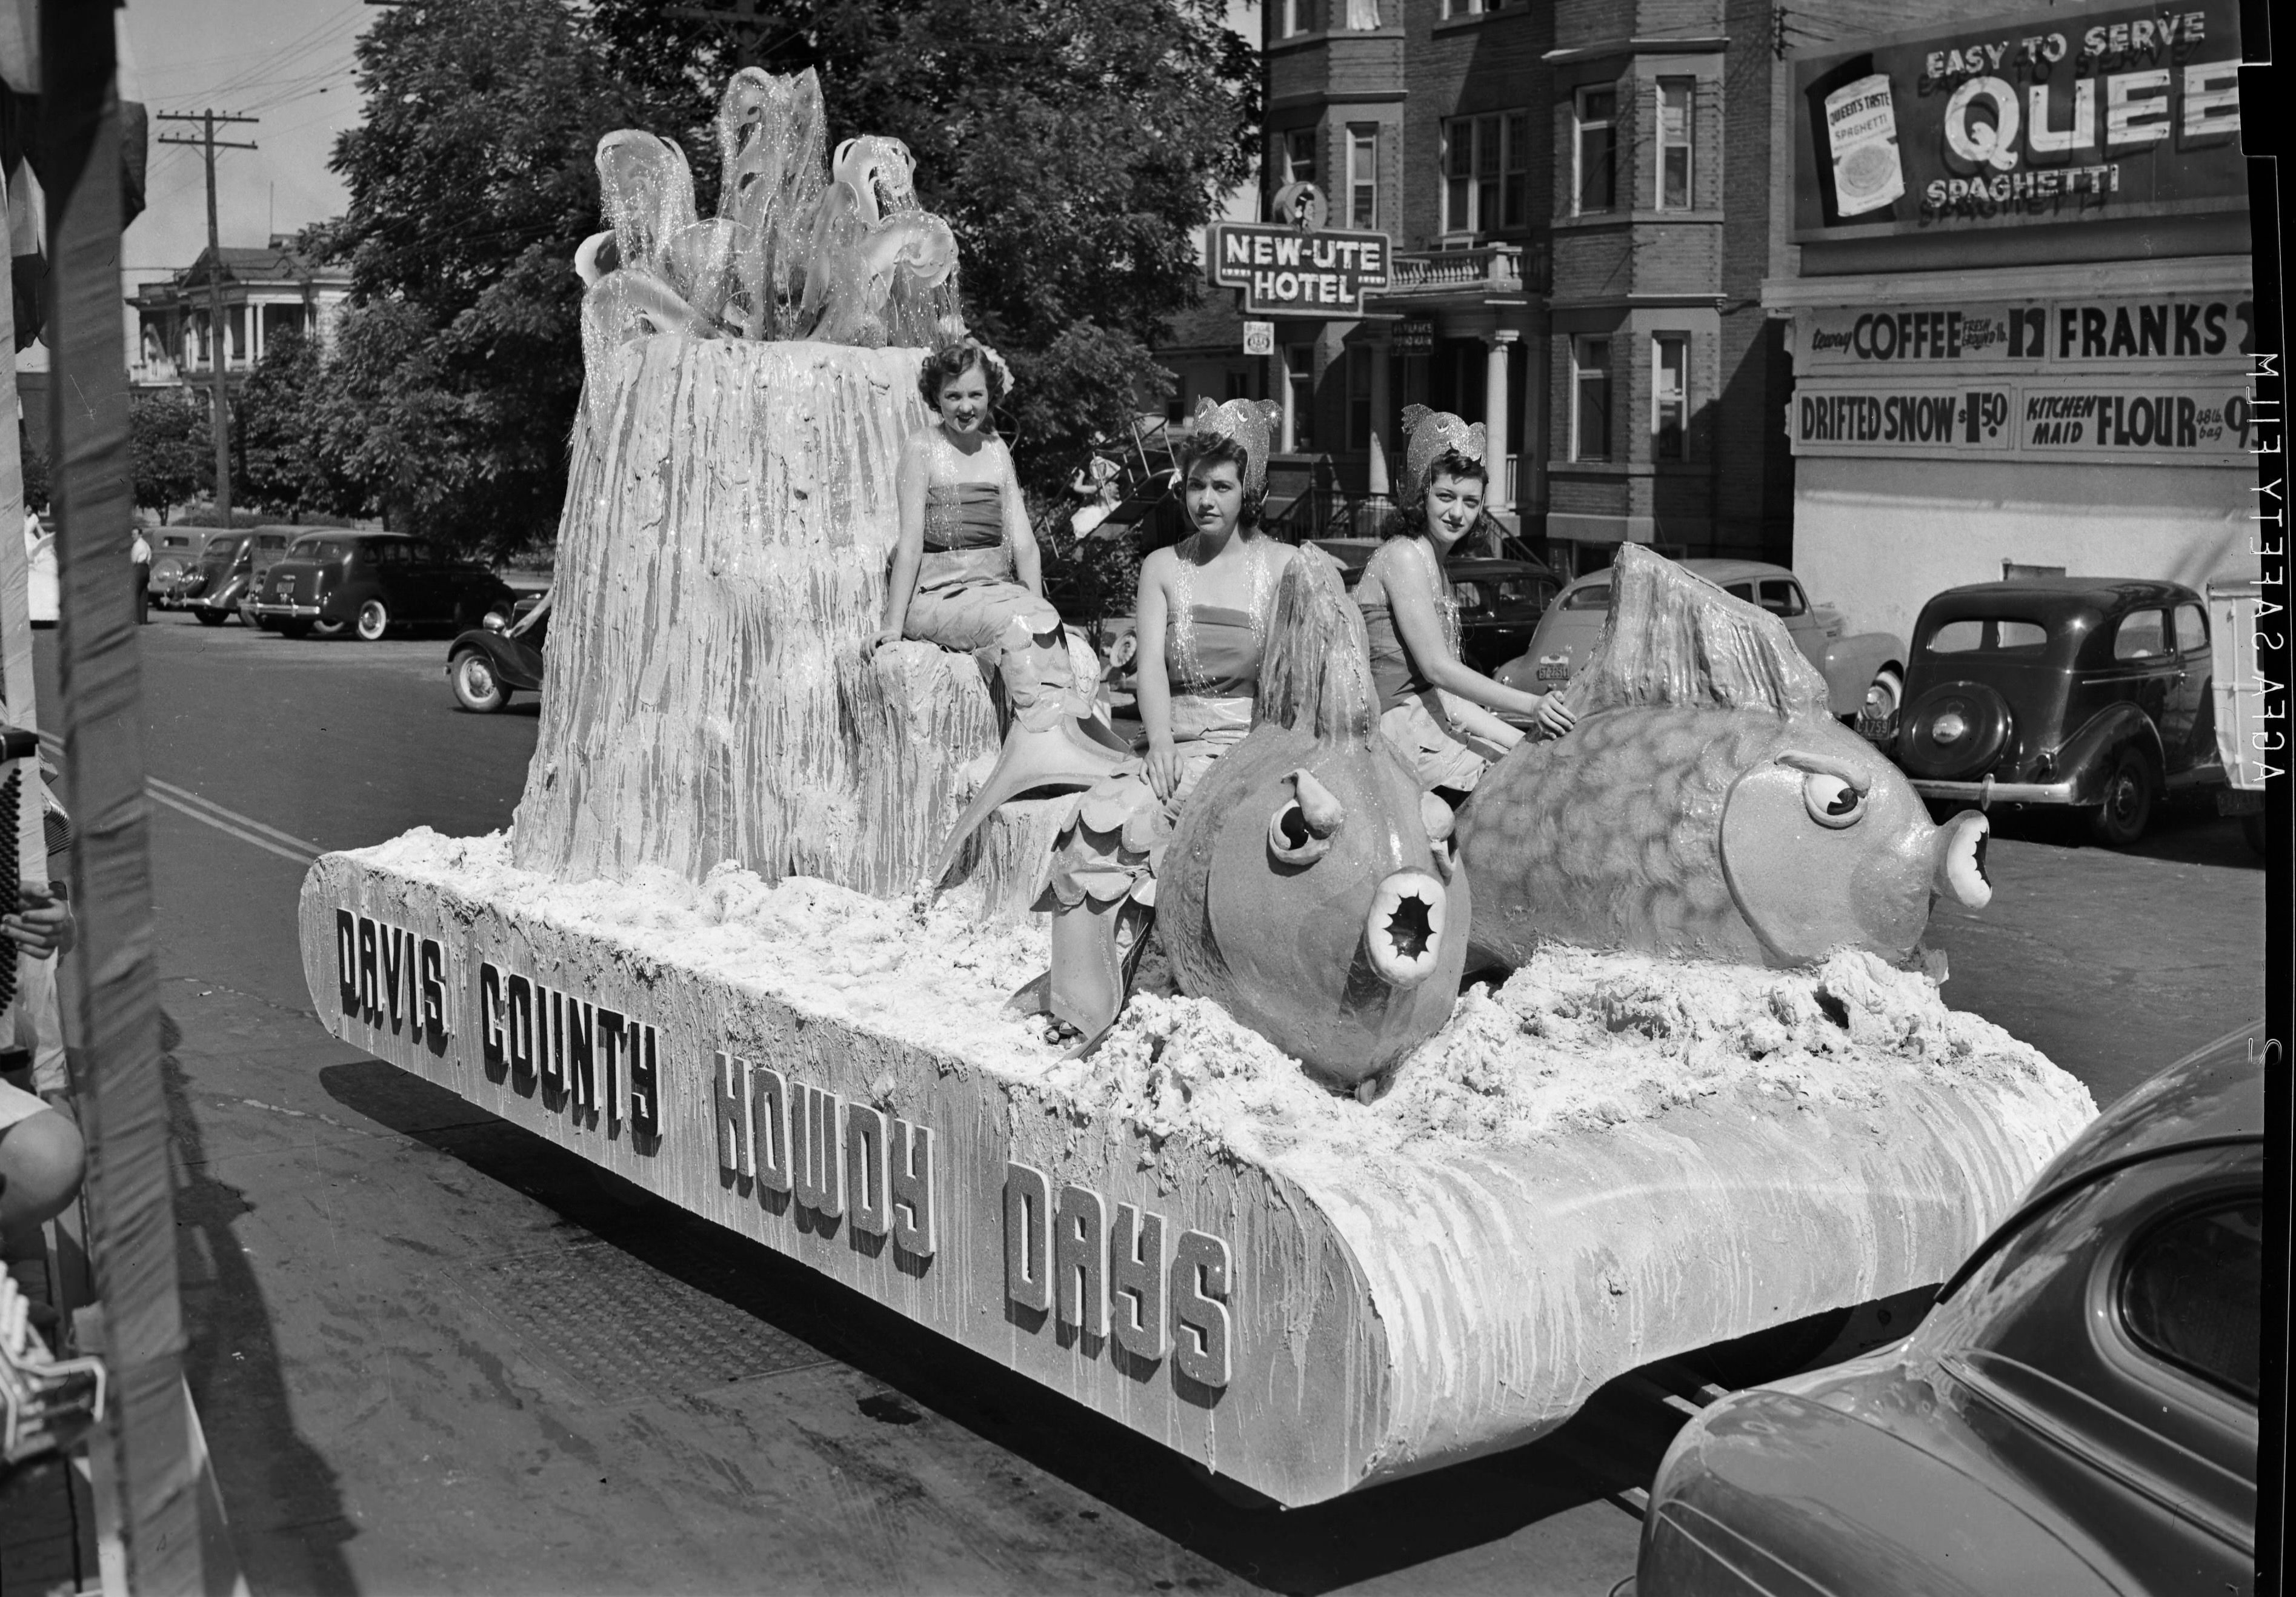 Women dressed as mermaids on a parade float in 1940.